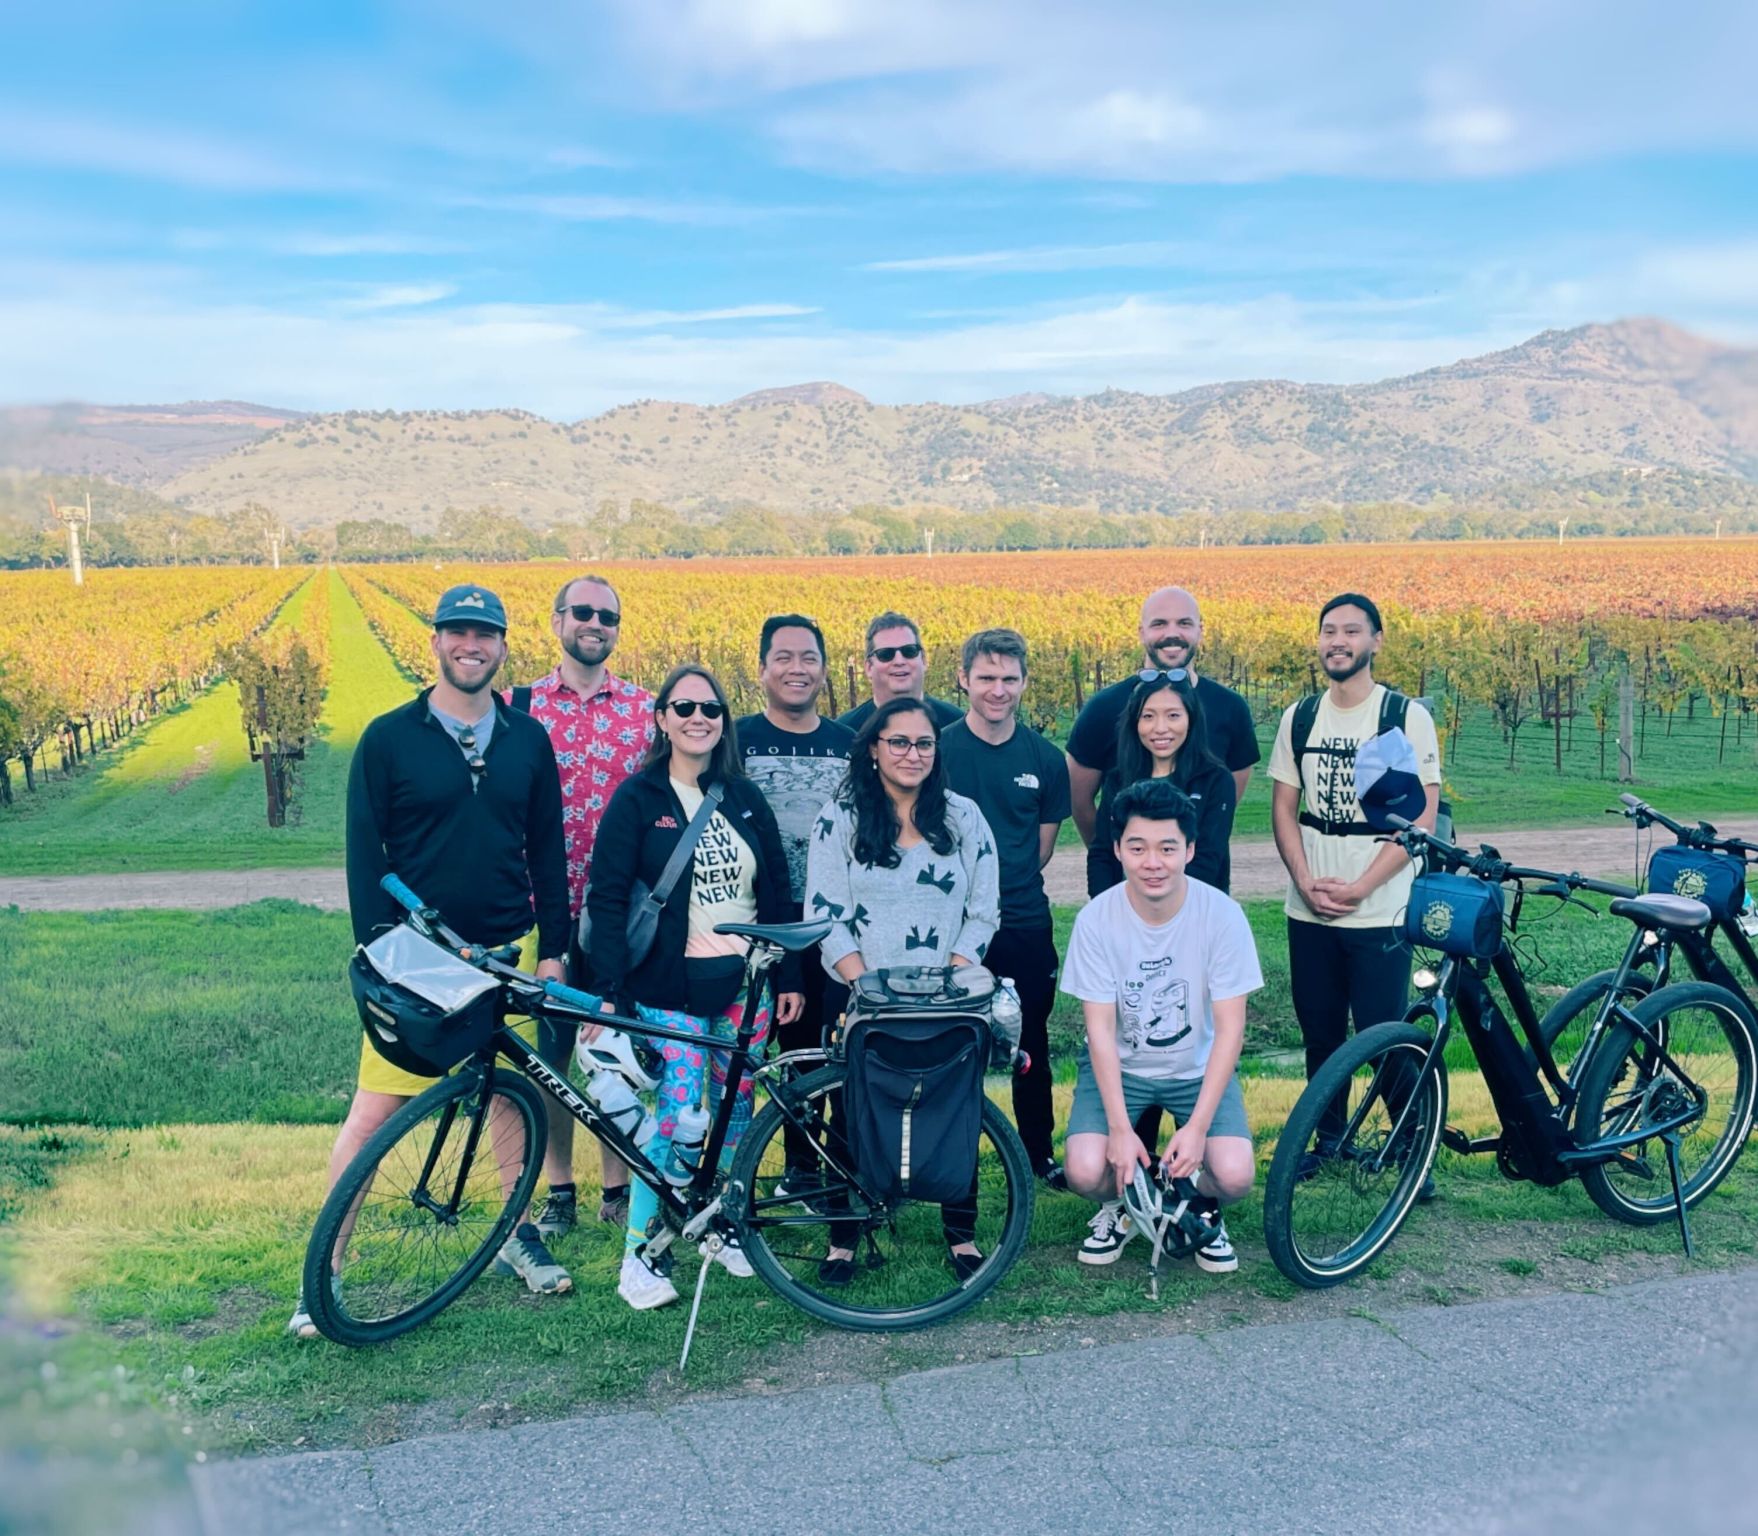 New Culture team at a vineyard in Napa